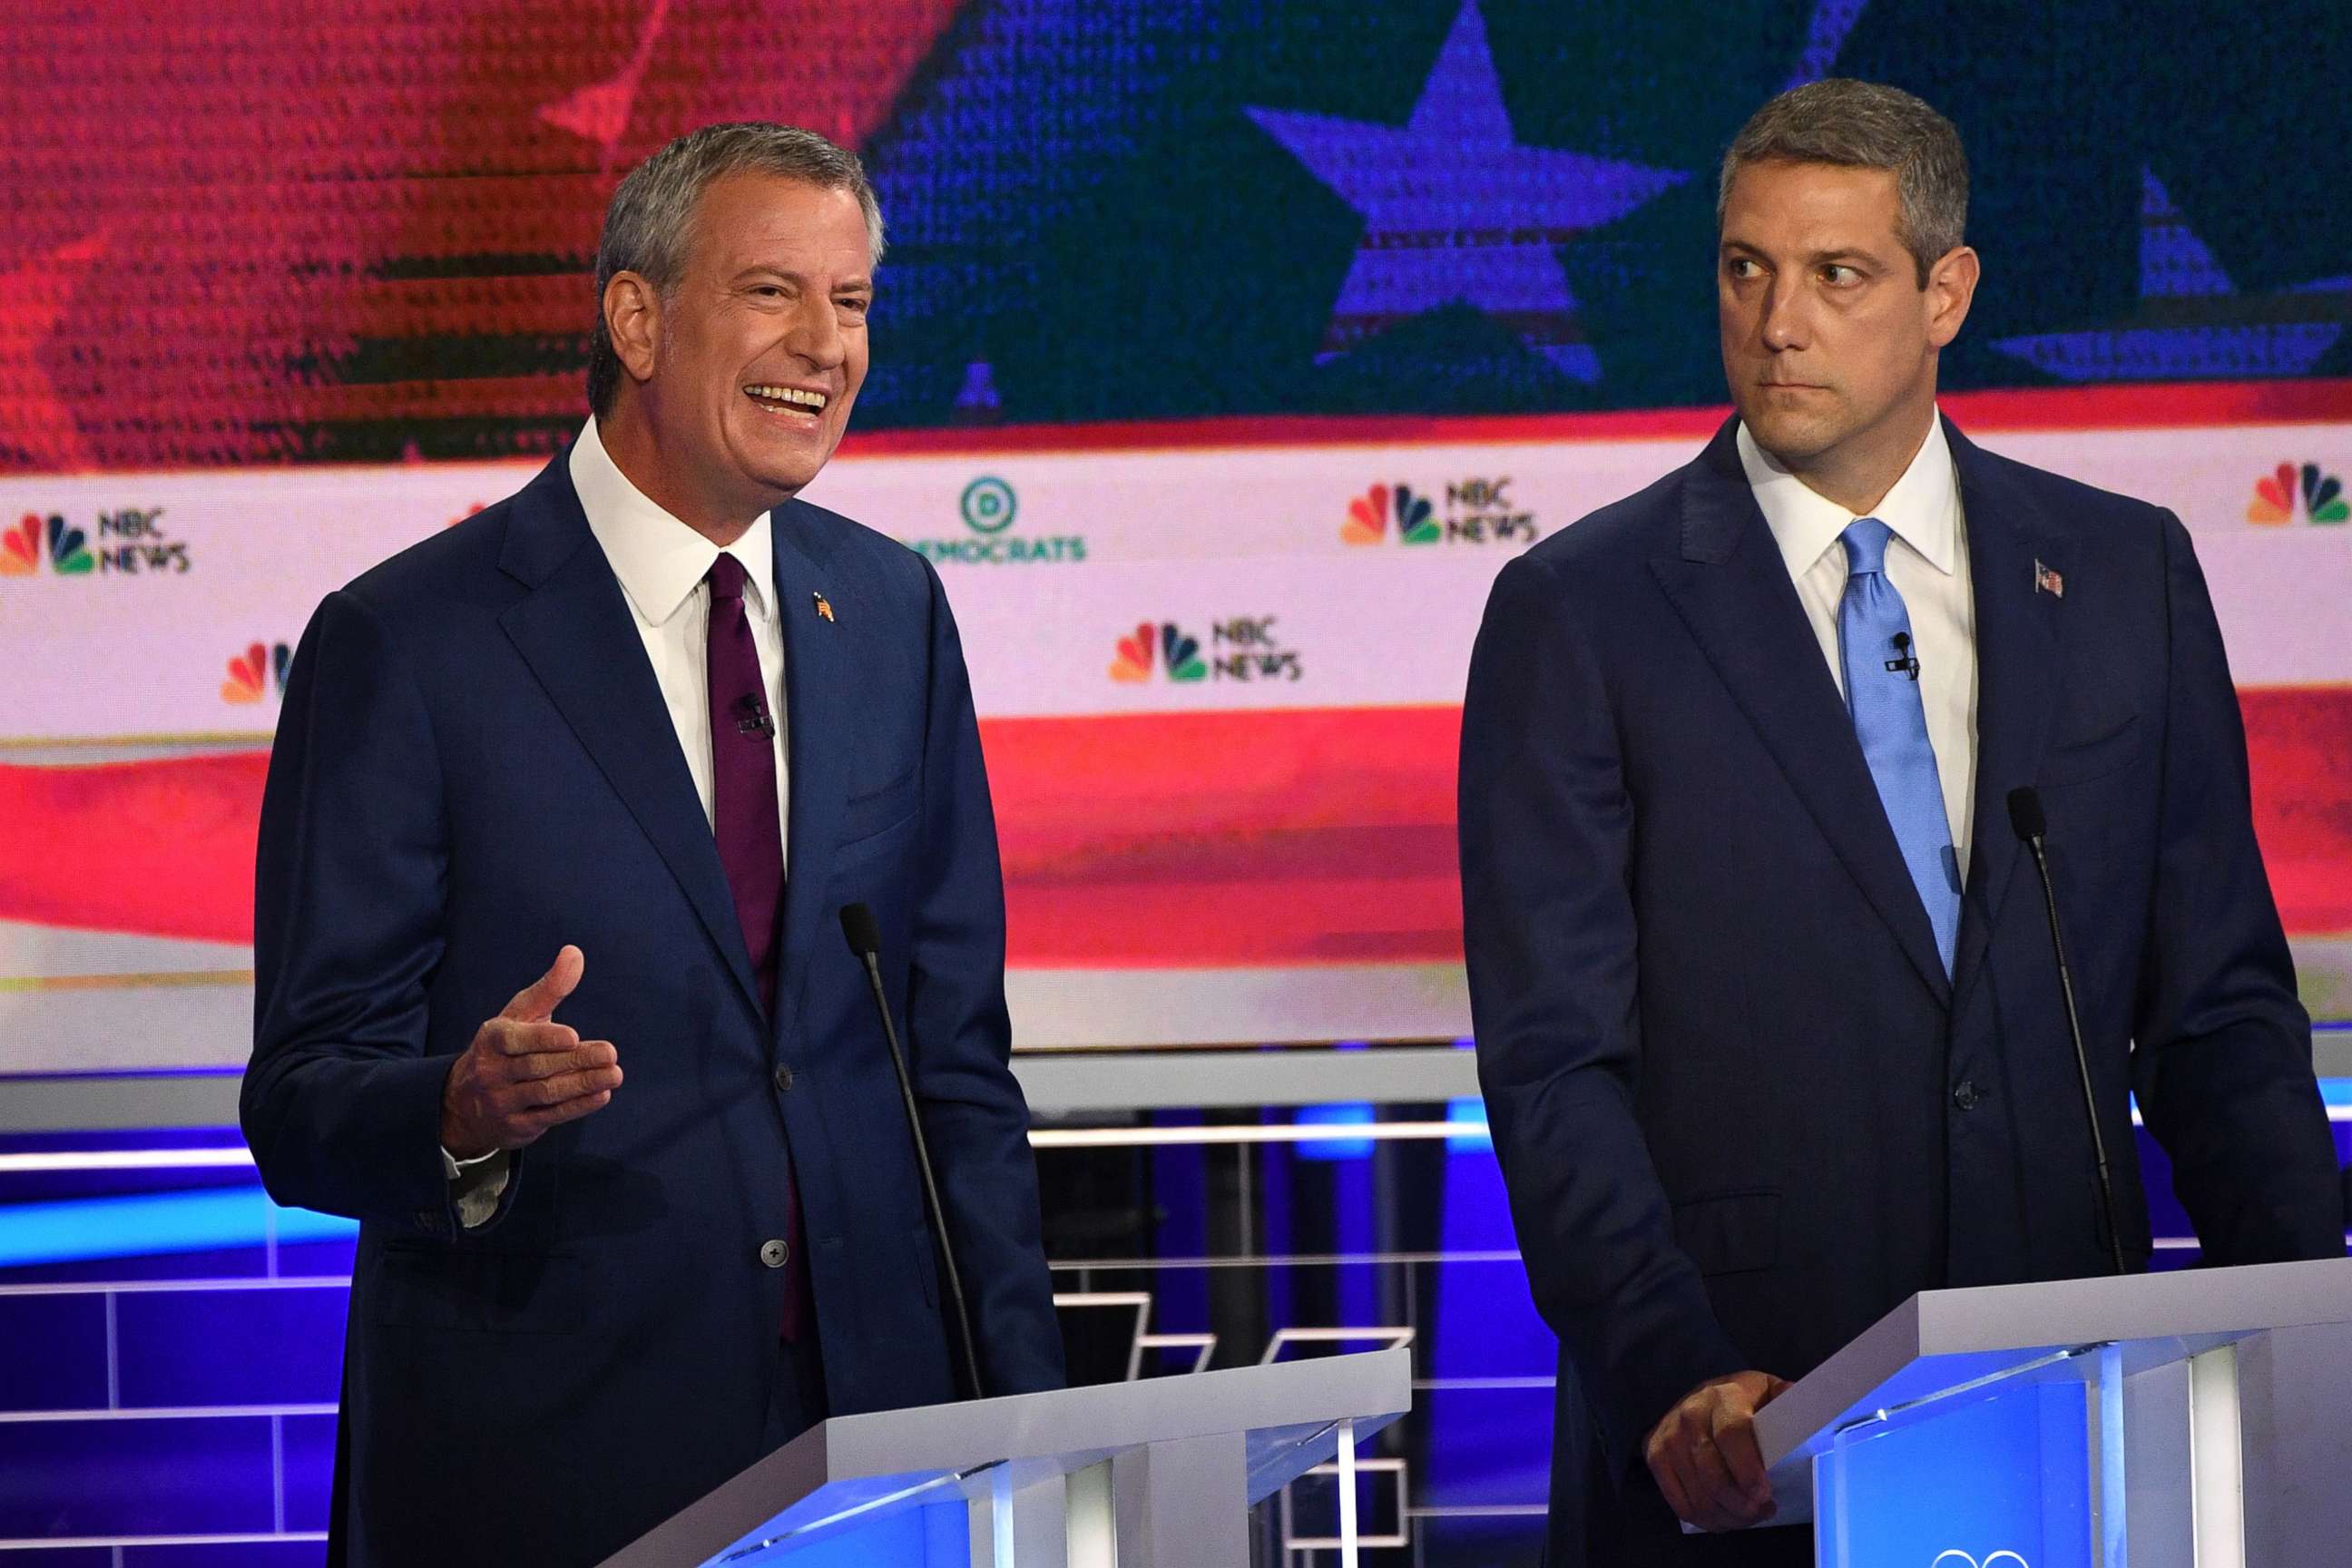 PHOTO: Mayor of New York City Bill de Blasio speaks as Tim Ryan looks on as they participate in the first Democratic primary debate hosted by NBC News at the Adrienne Arsht Center for the Performing Arts in Miami, Florida, June 26, 2019.